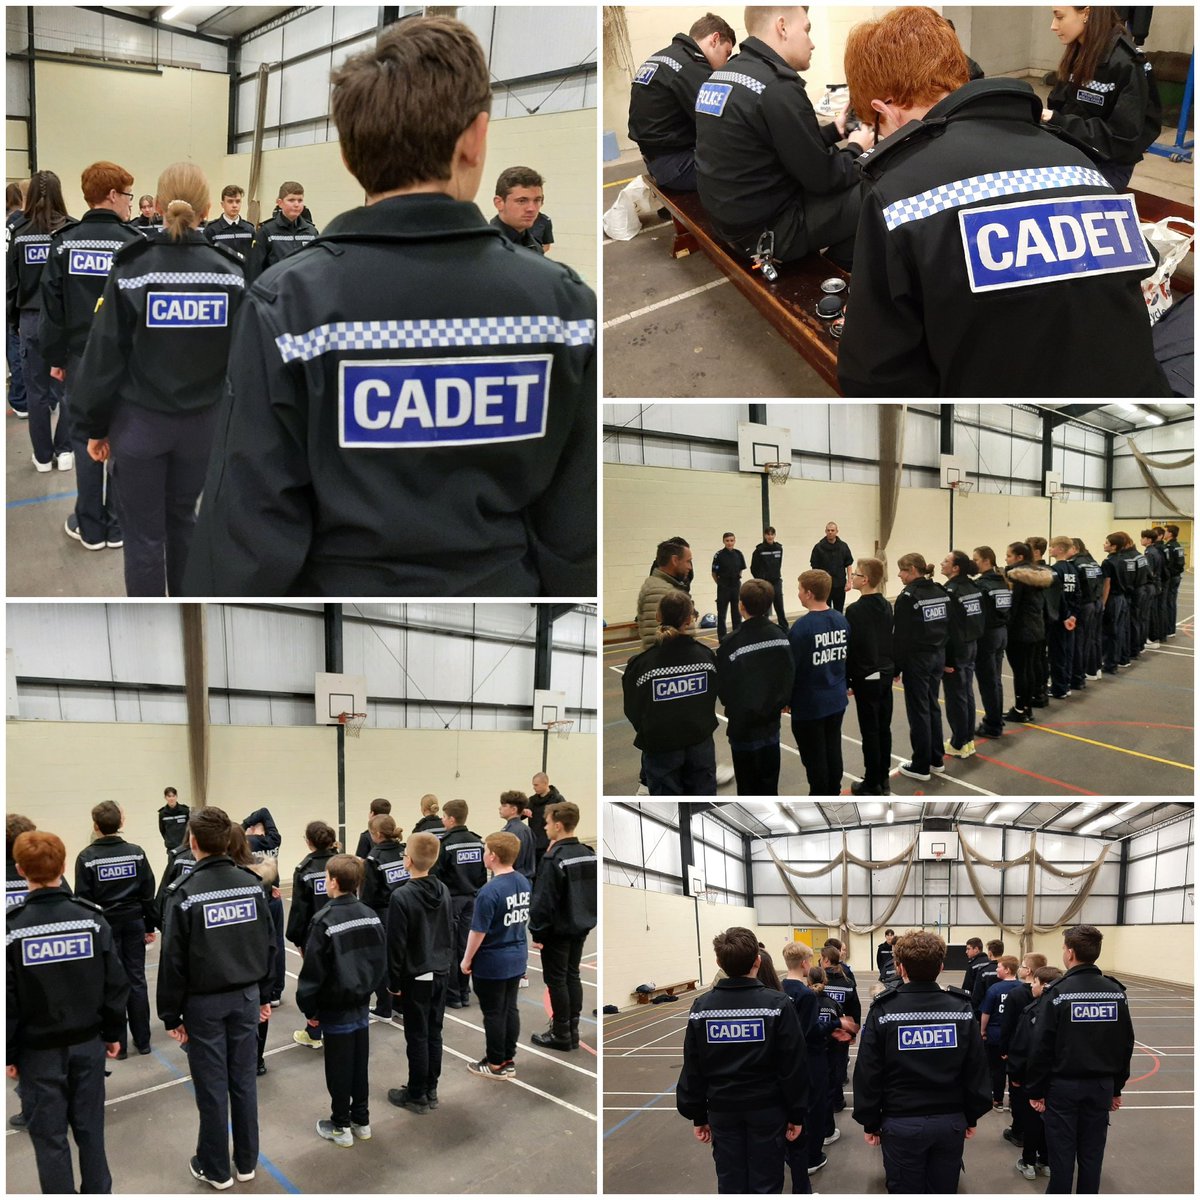 #DoverVPC have been preparing for their Passing Out Parade, which is due in April. We are very proud of our #Cadets and their many accomplishments over the past year #nationalvpc #kentpolicecadets